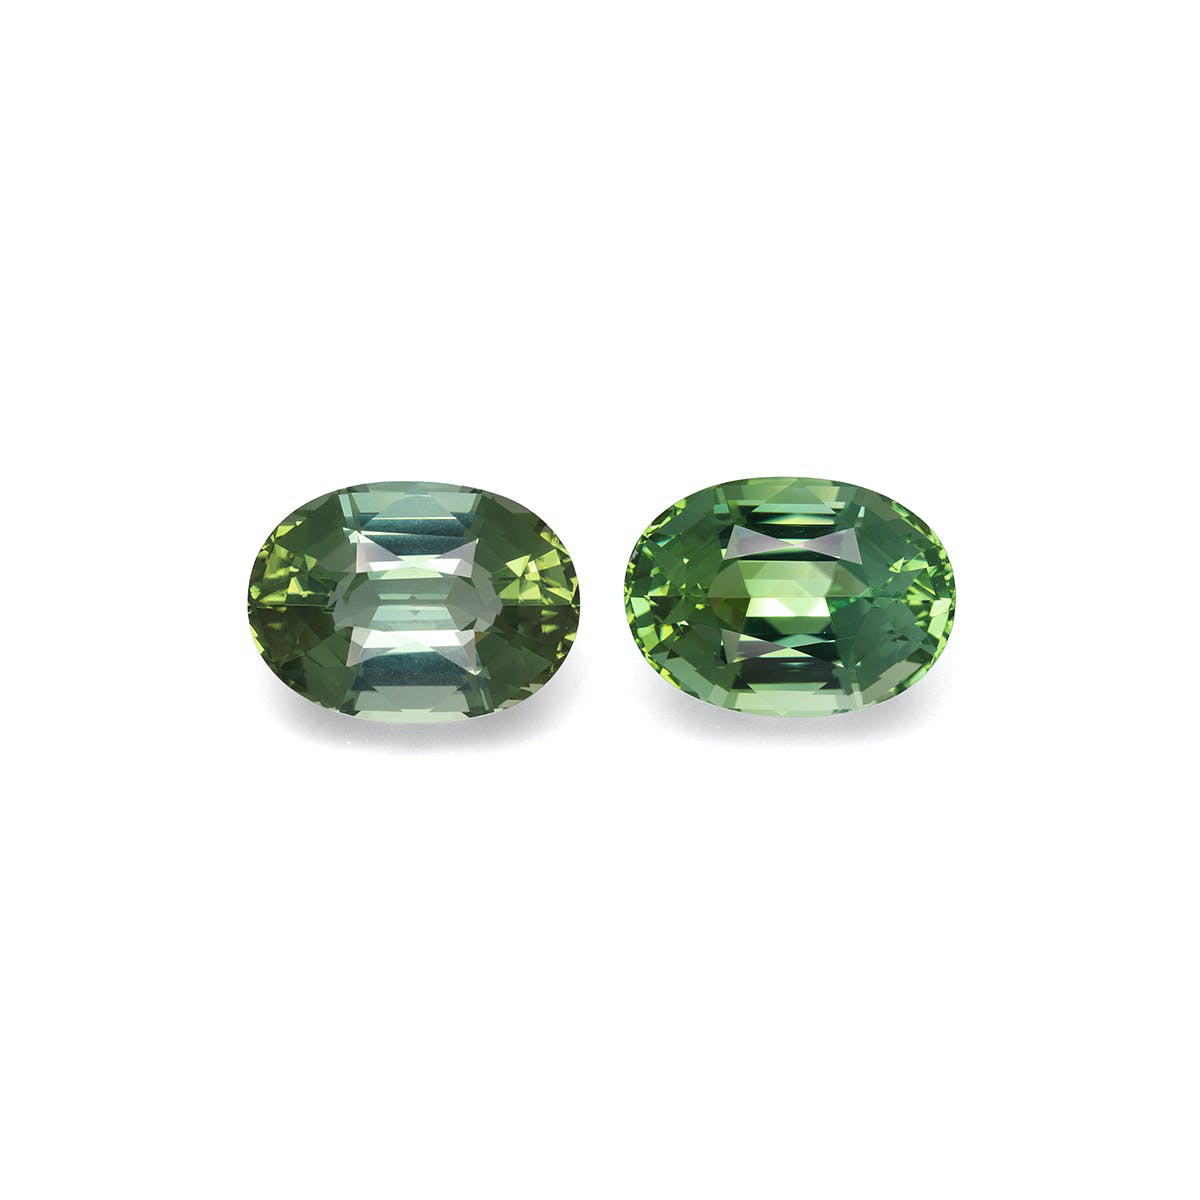 Picture of Cotton Green Tourmaline 33.63ct - Pair (TG0521)